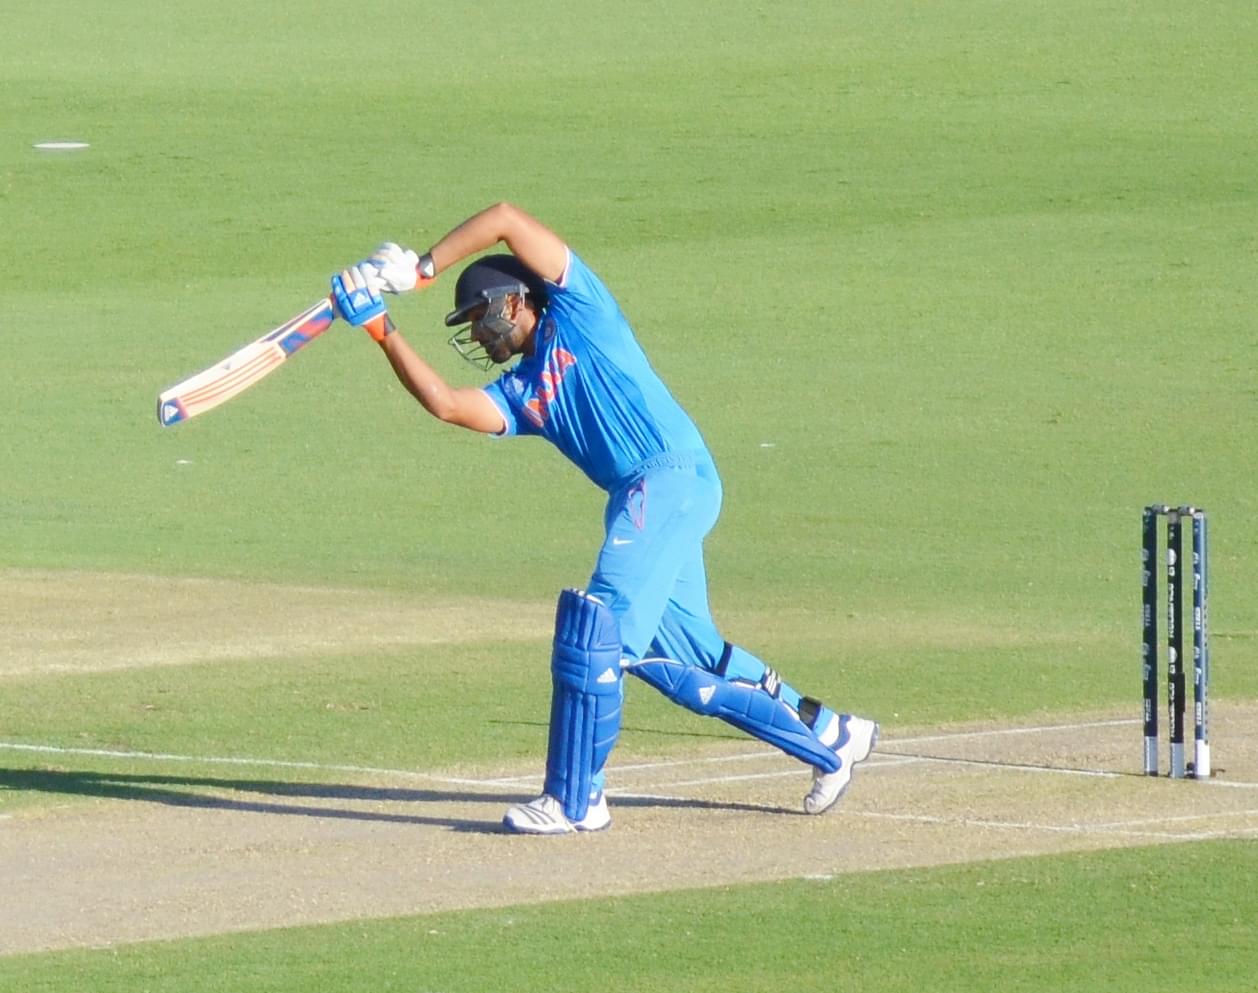 India's Predicted Playing XI for first T20I vs Windies